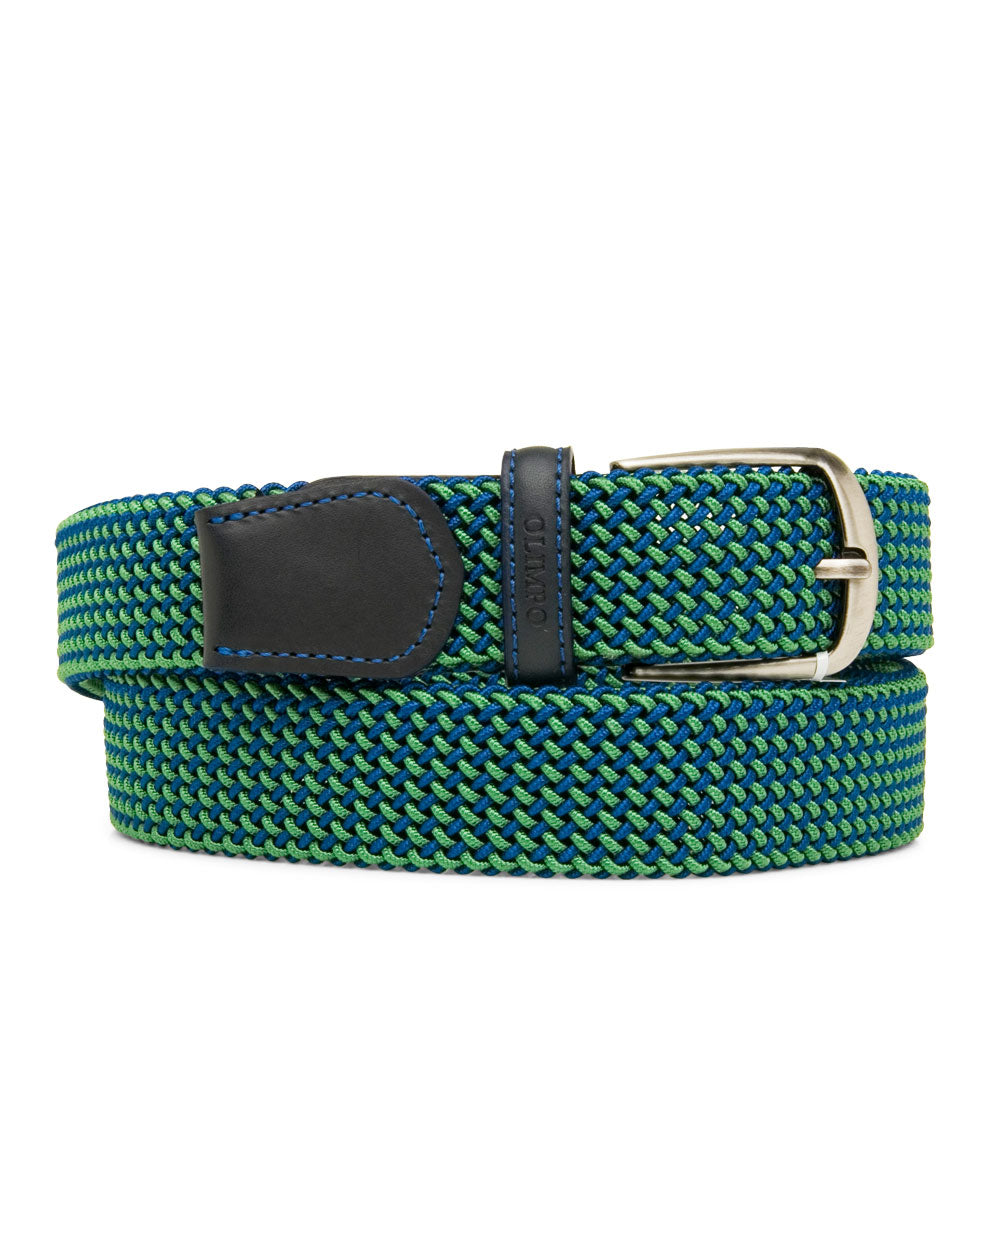 Braided Cotton Belt in Blue and Green